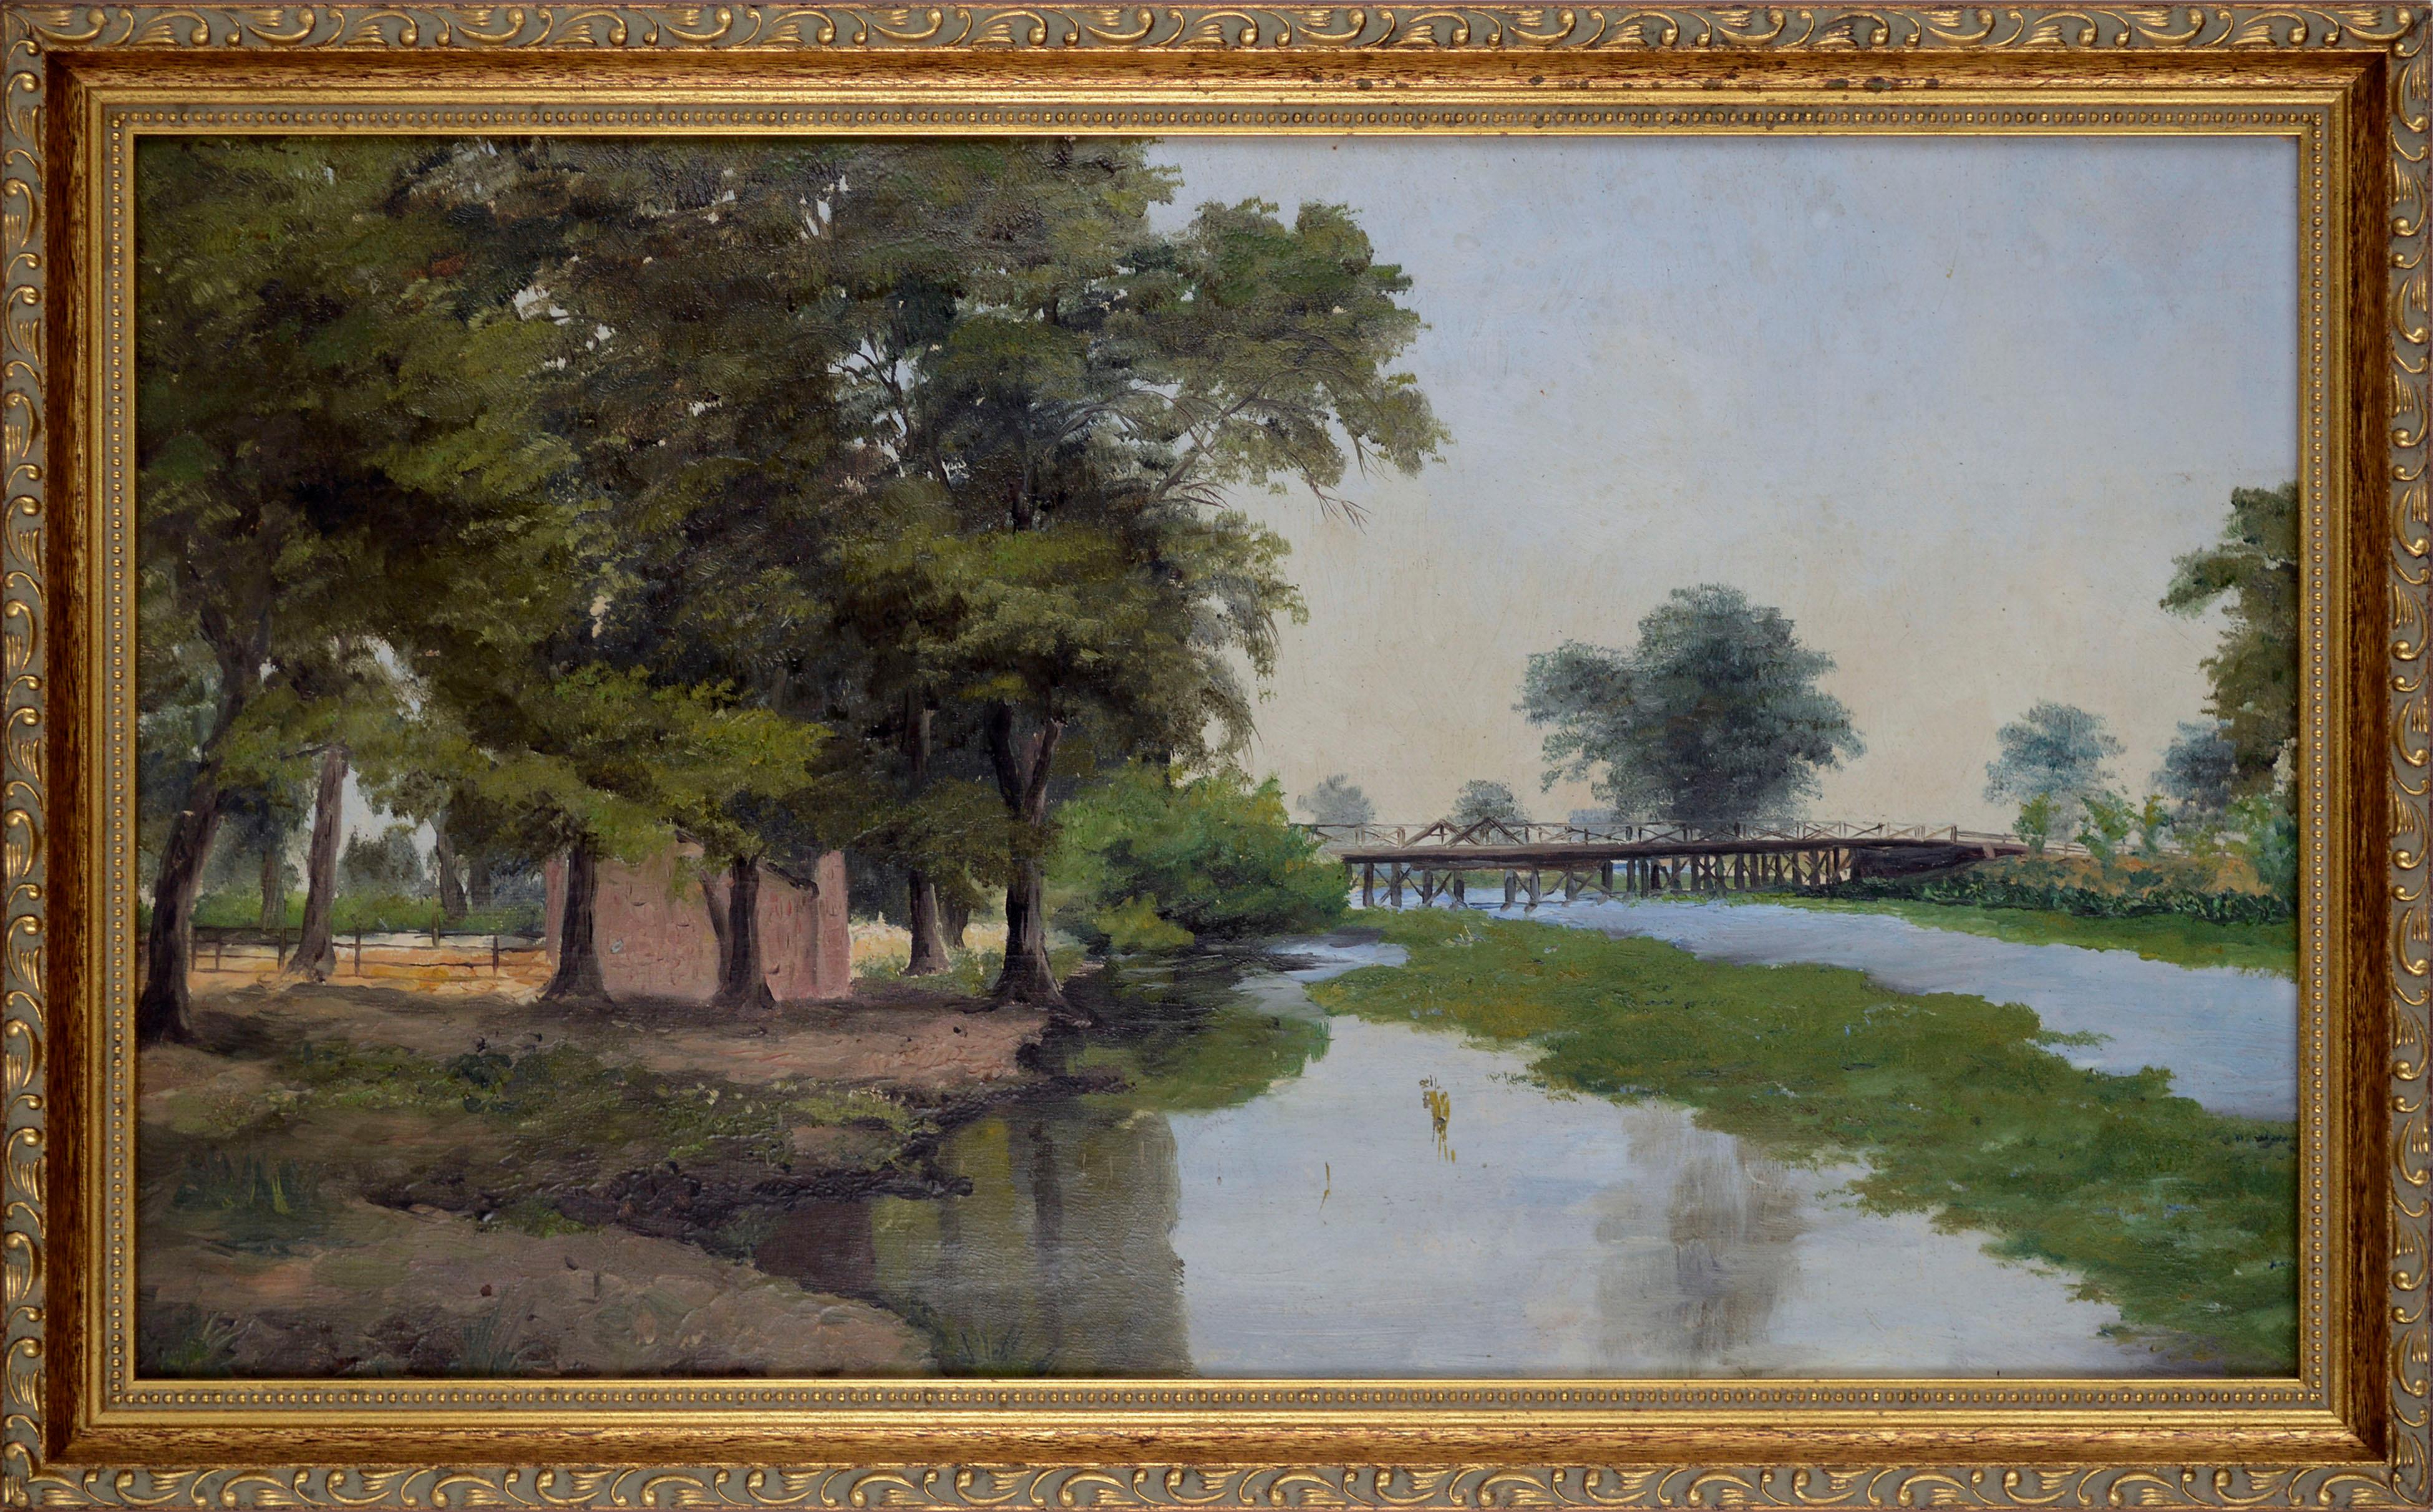 Florence Bugbee Banham Landscape Painting - Early 20th Century Bay Area California Landscape with Bridge 